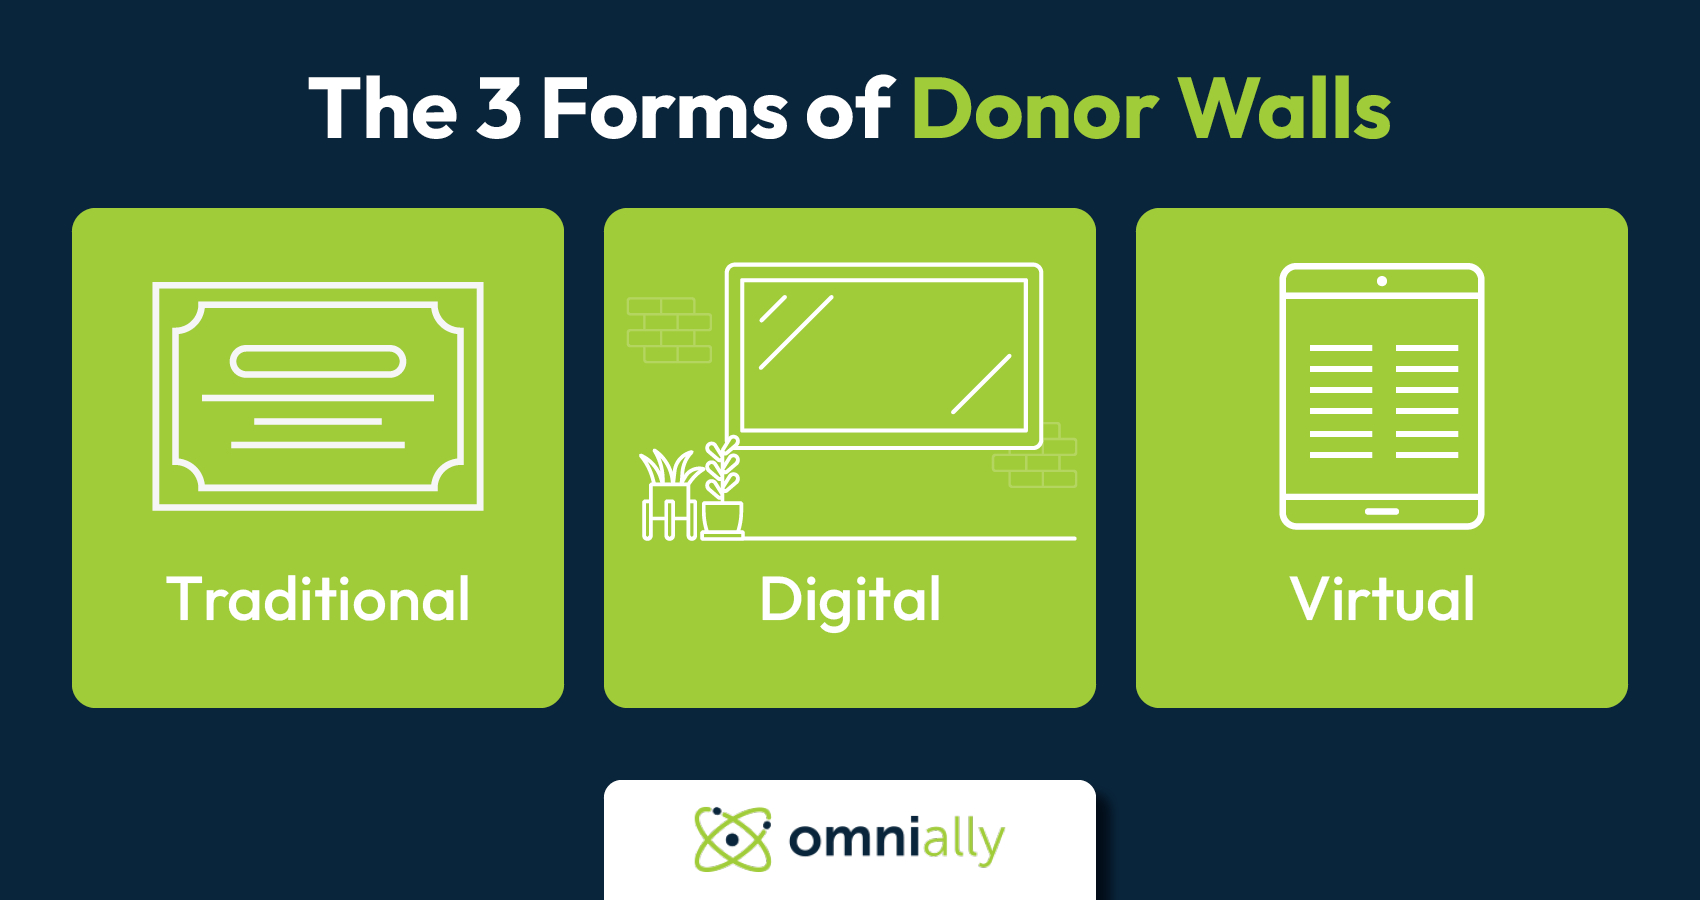 The three different forms that donor walls take, discussed in more detail in the text below.